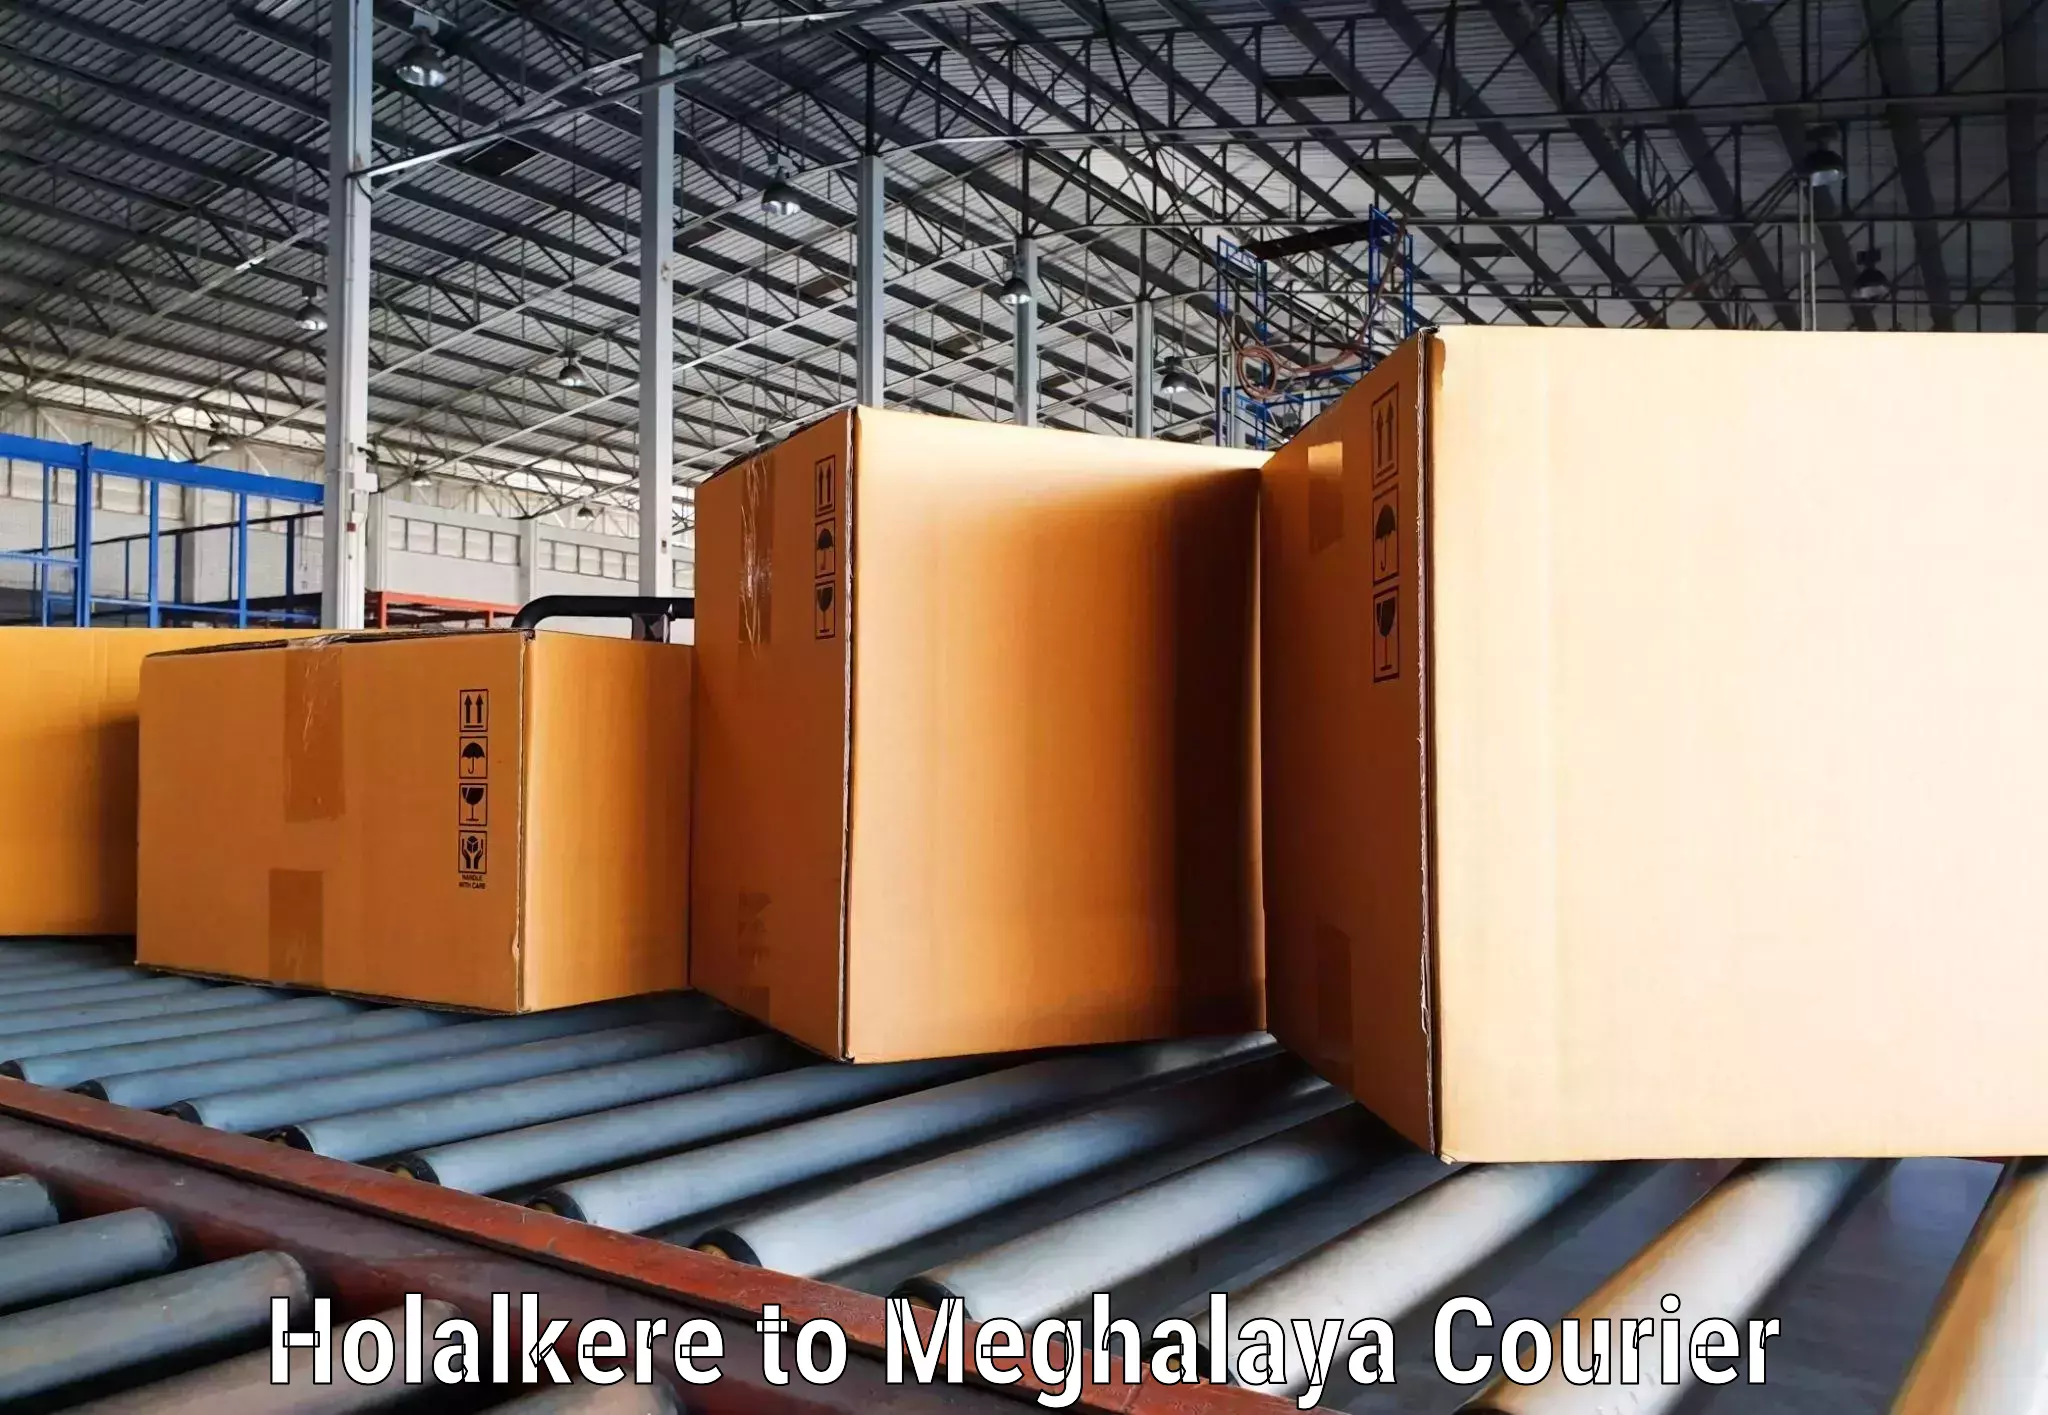 Multi-package shipping in Holalkere to Meghalaya